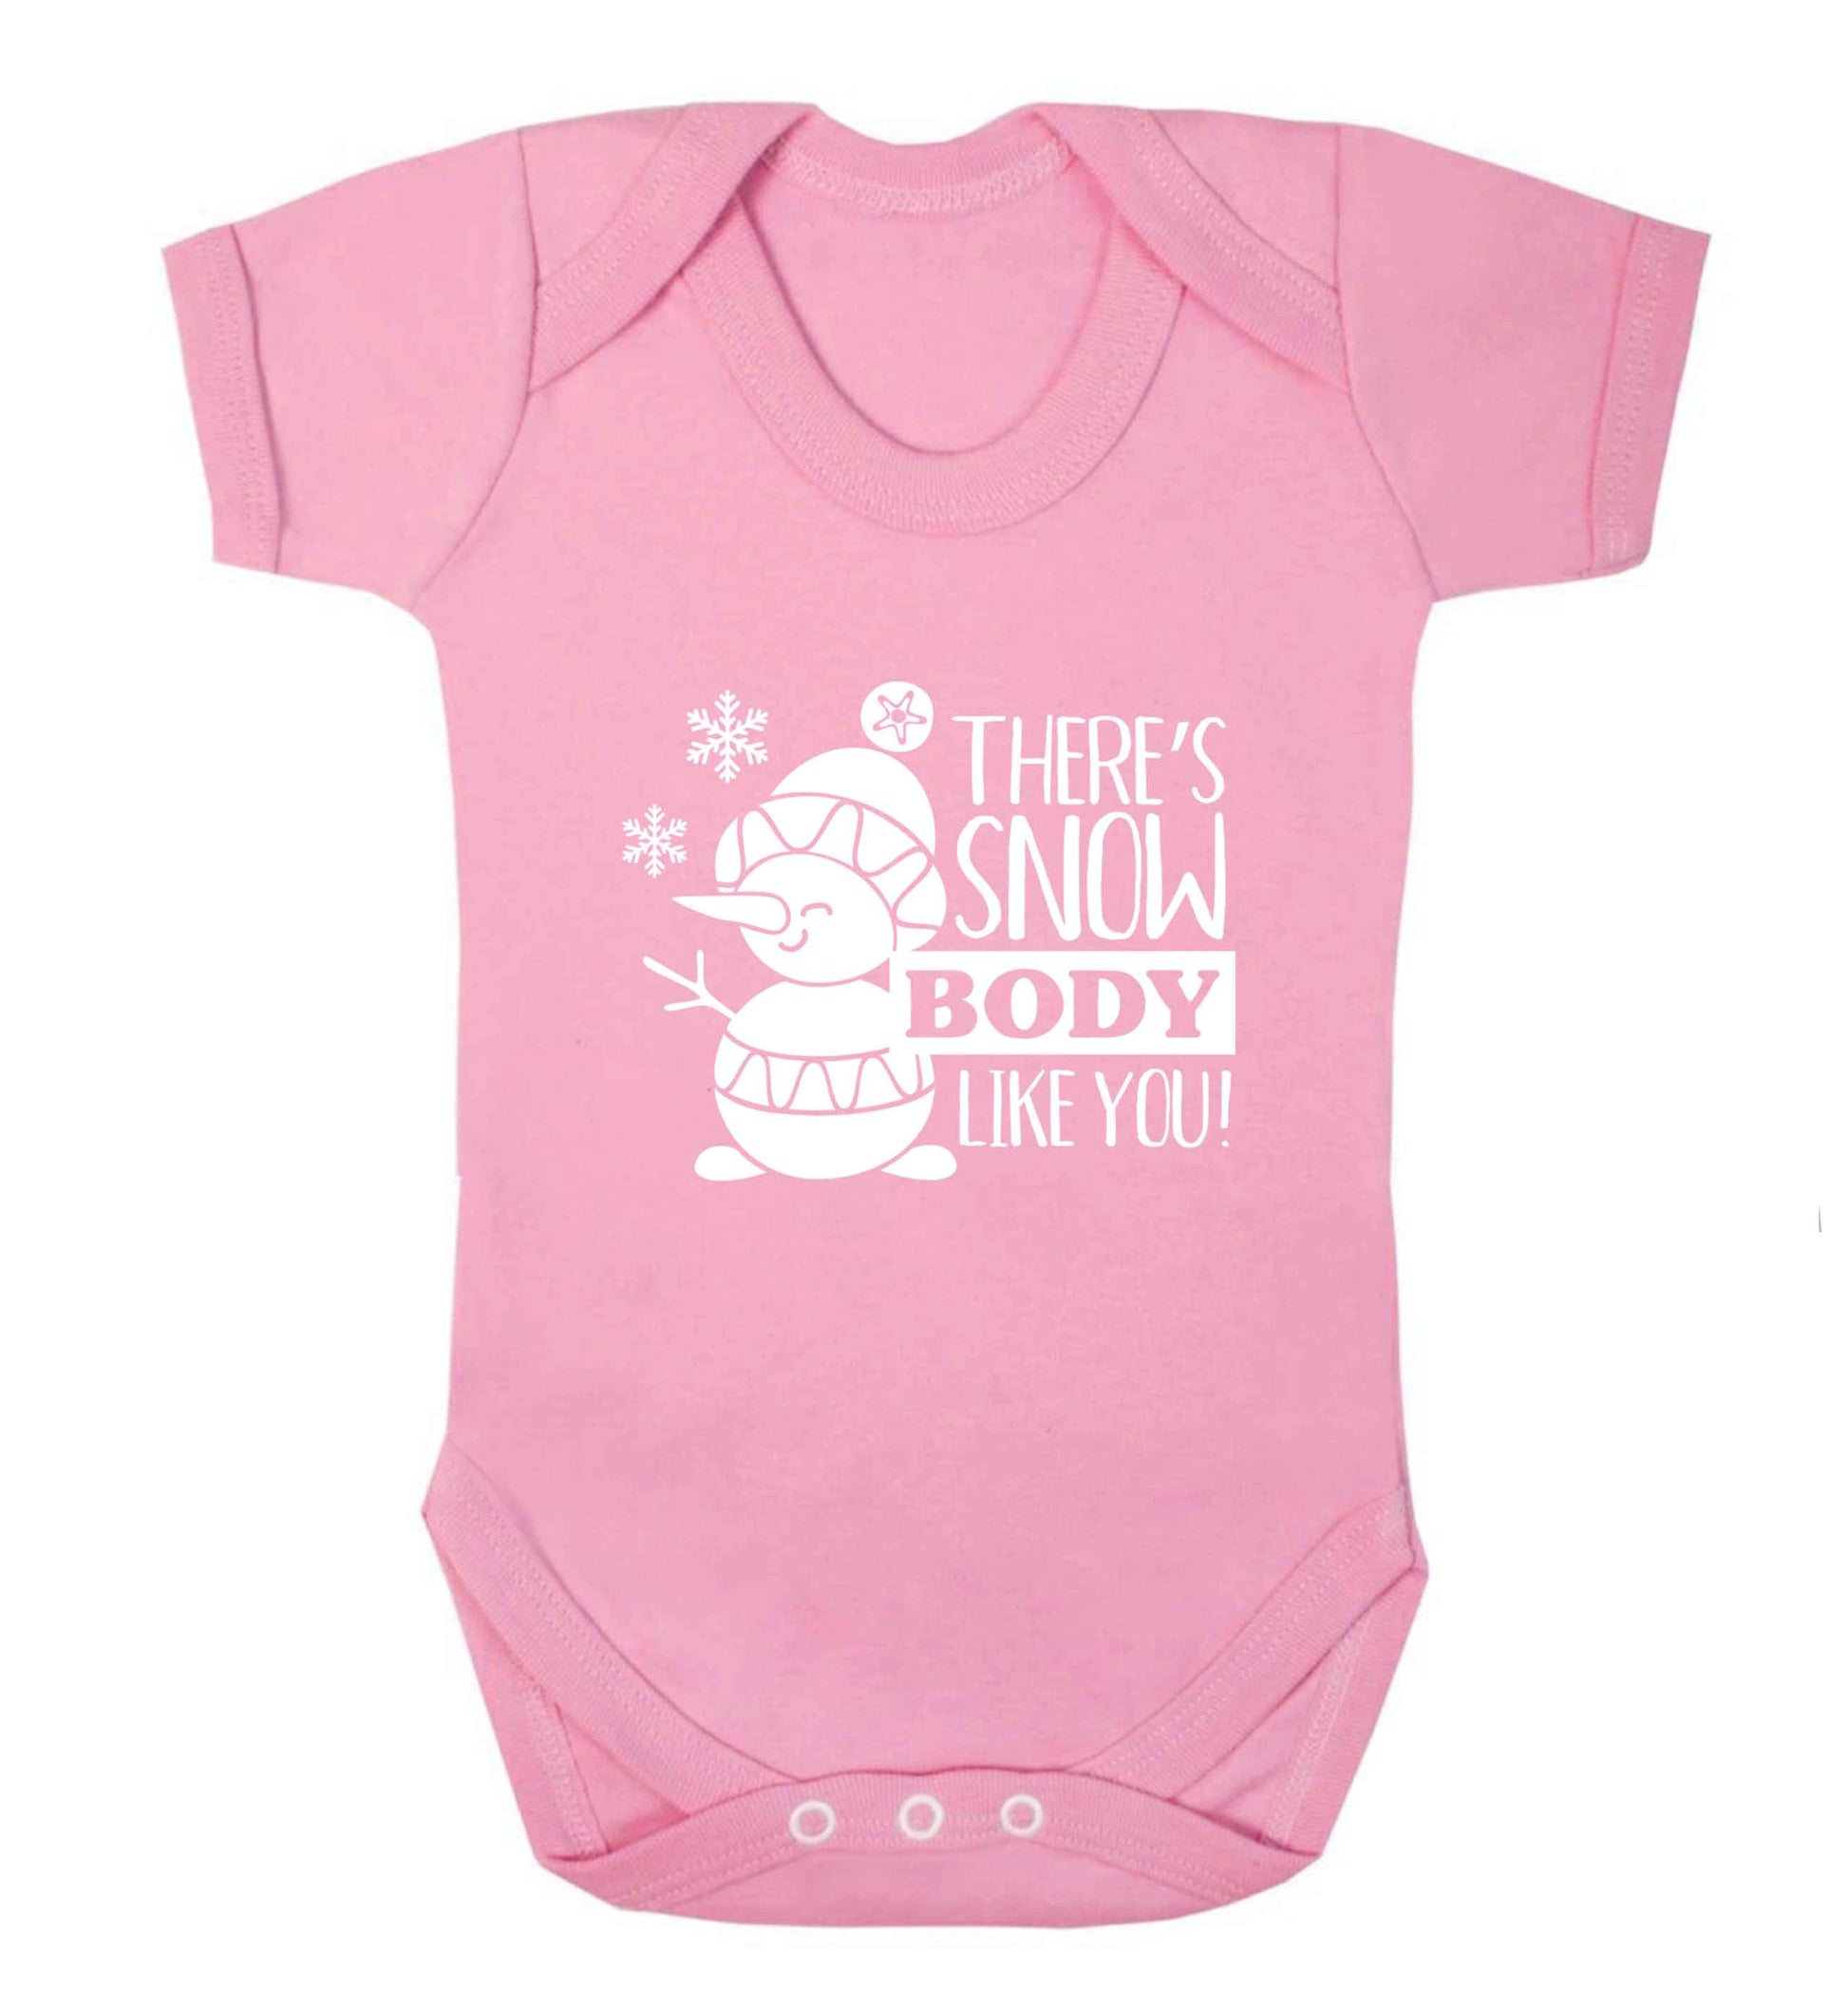 There's snow body like you baby vest pale pink 18-24 months